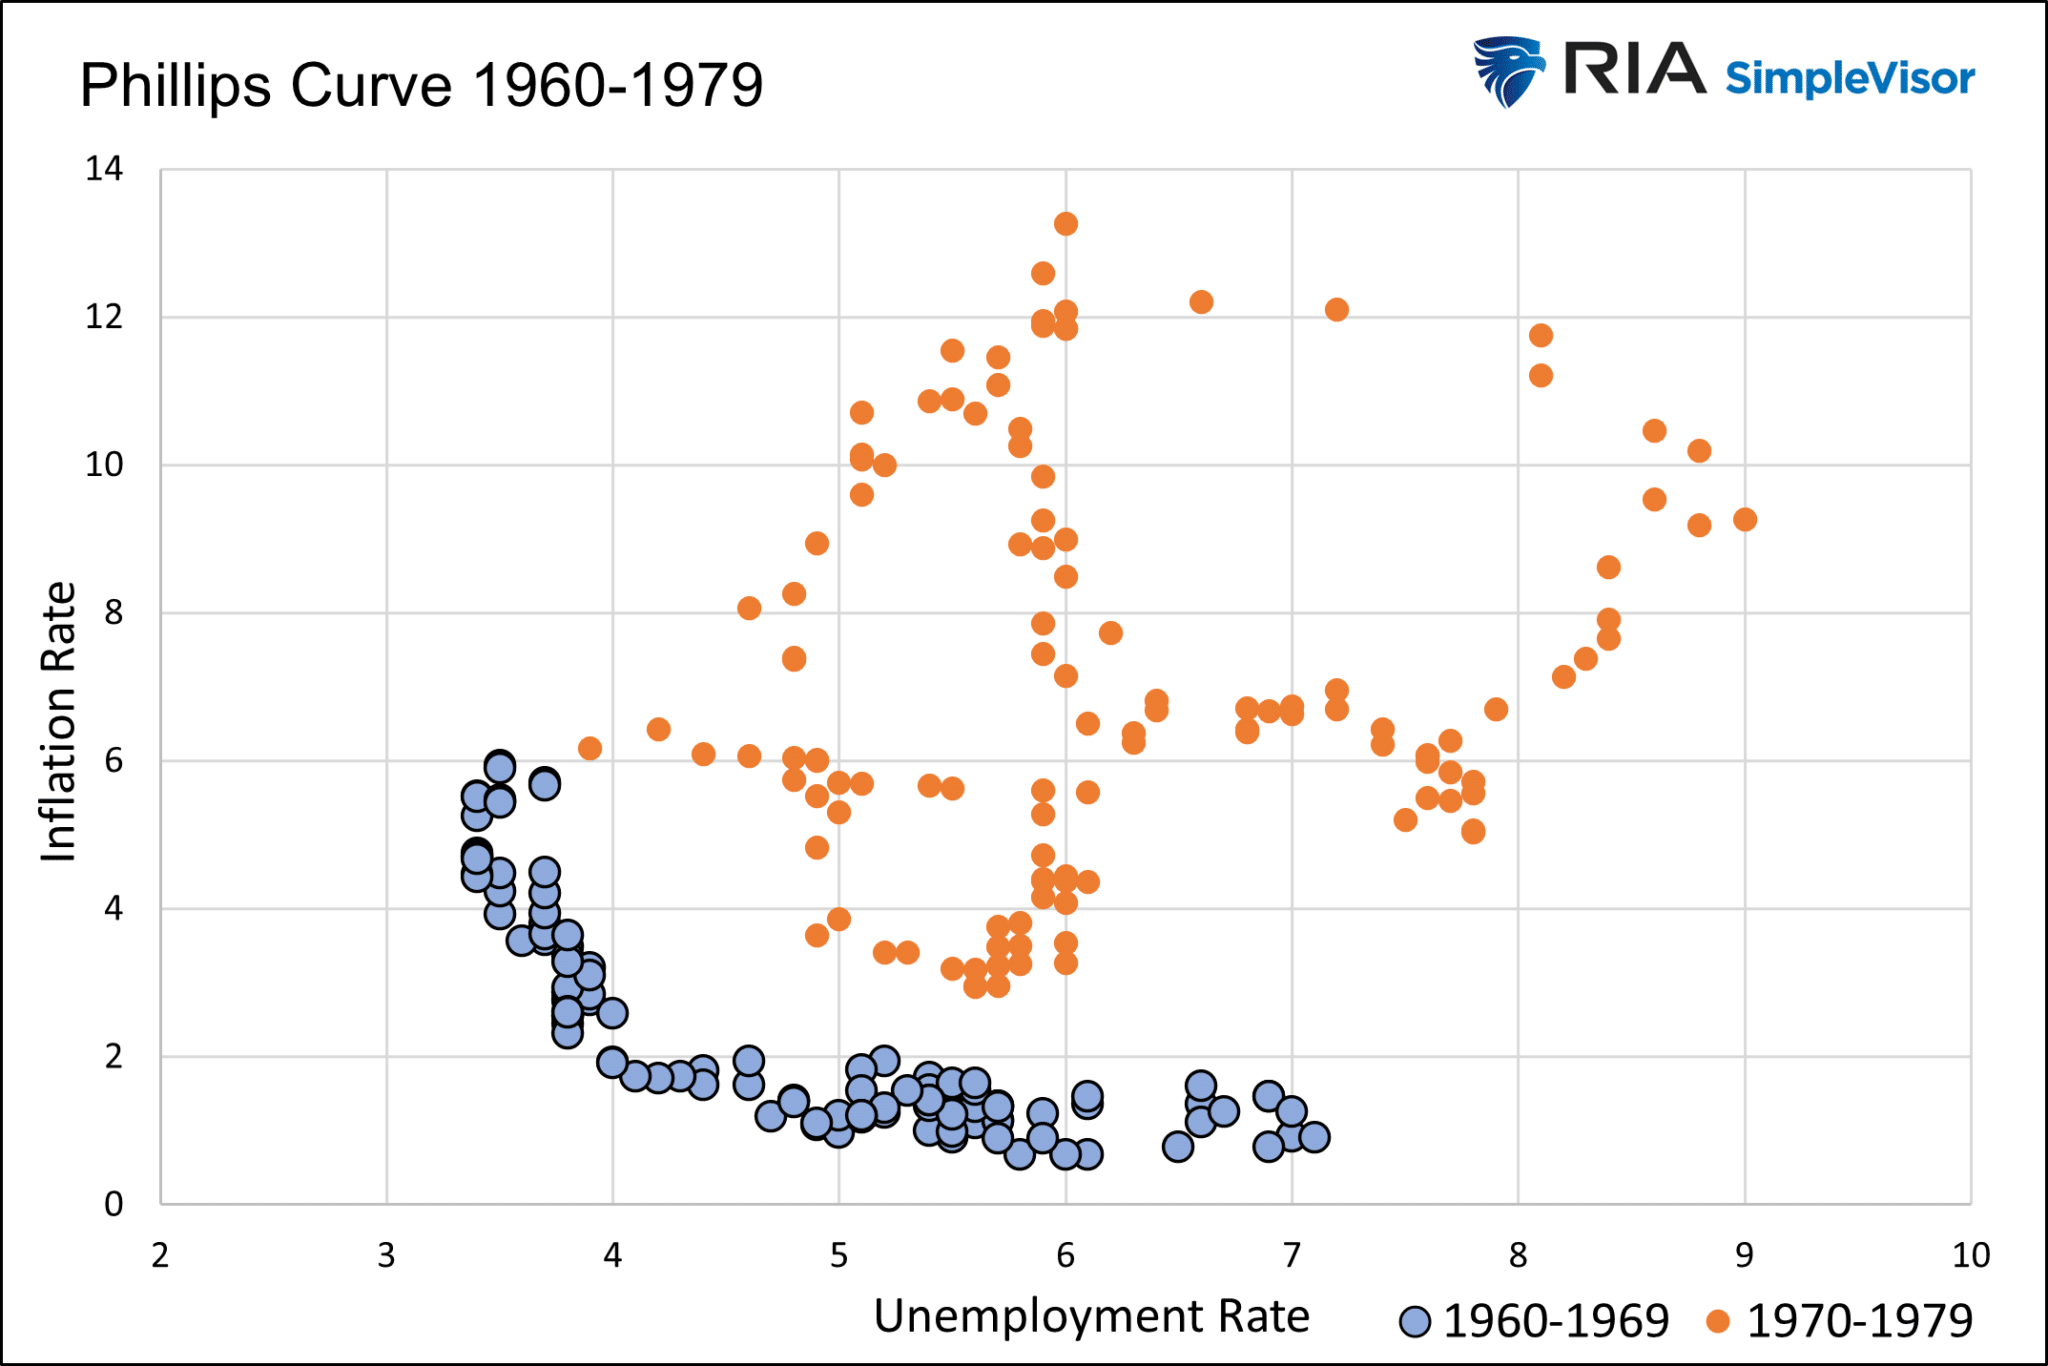 Phillips Curve-60s and 70s